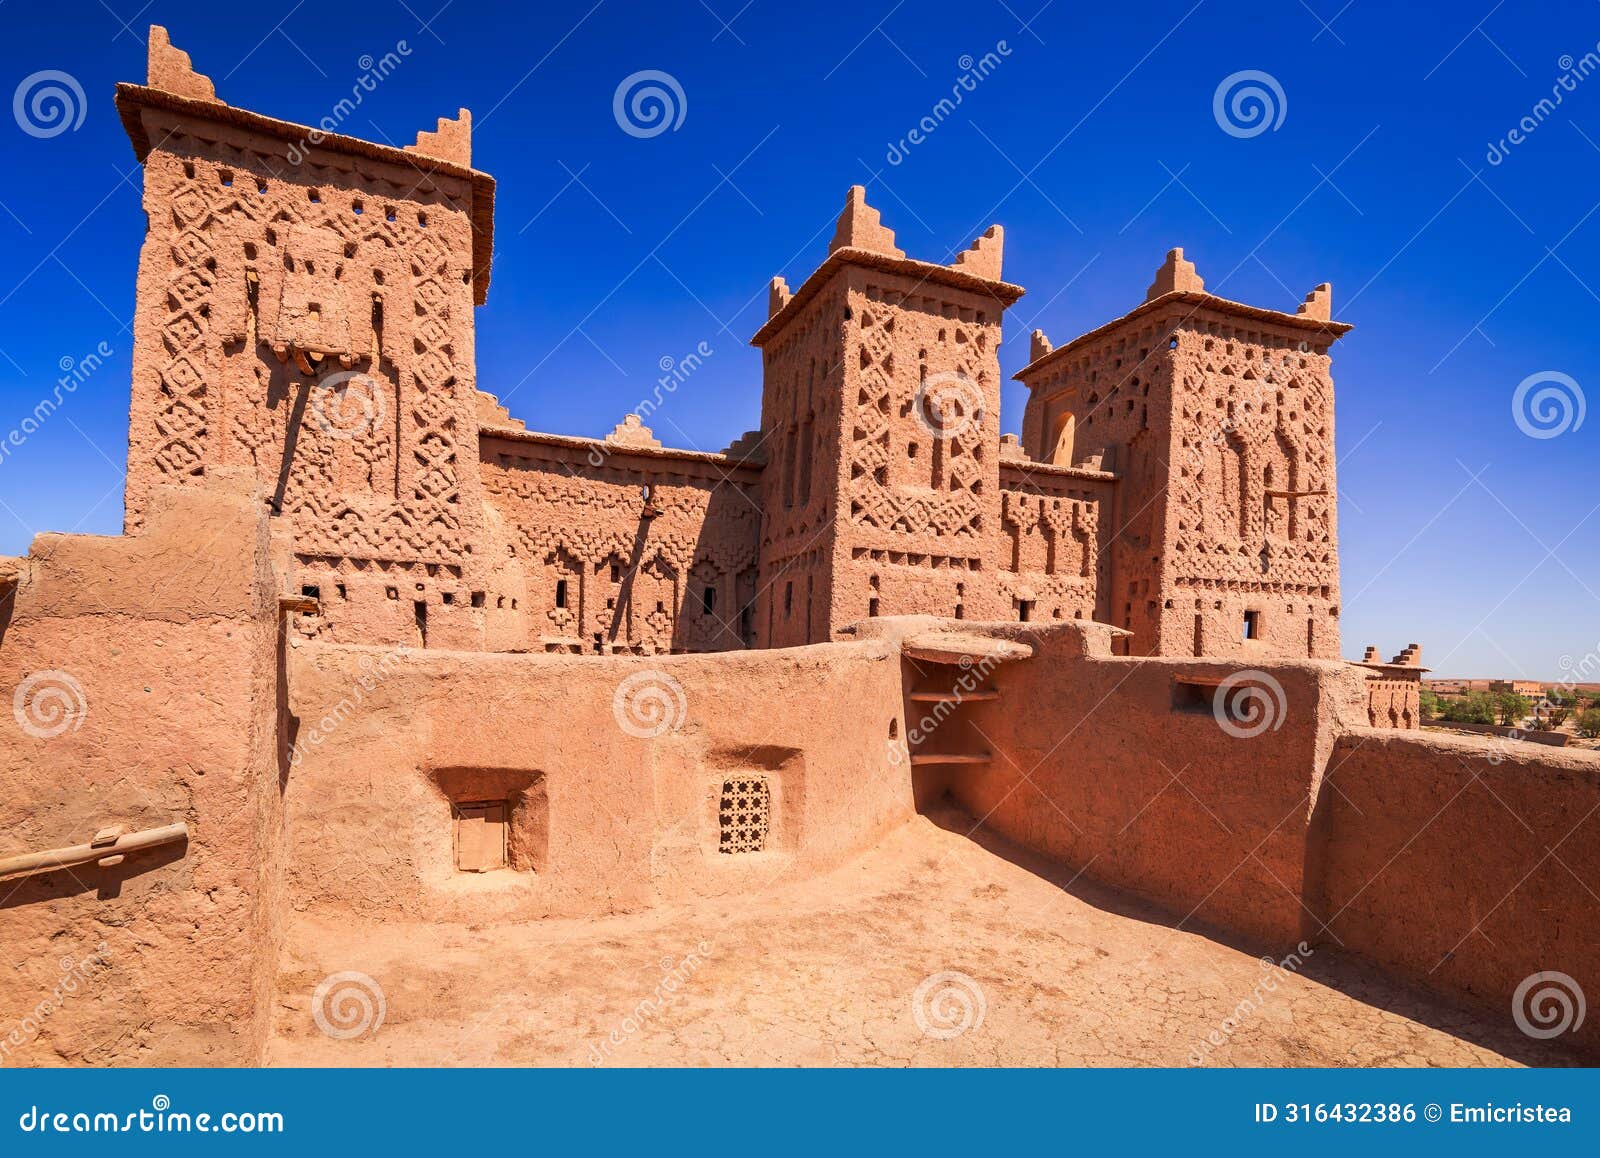 skoura, morocco. kasbah amridil, historical fortified architecture in high atlas mountains range, north africa